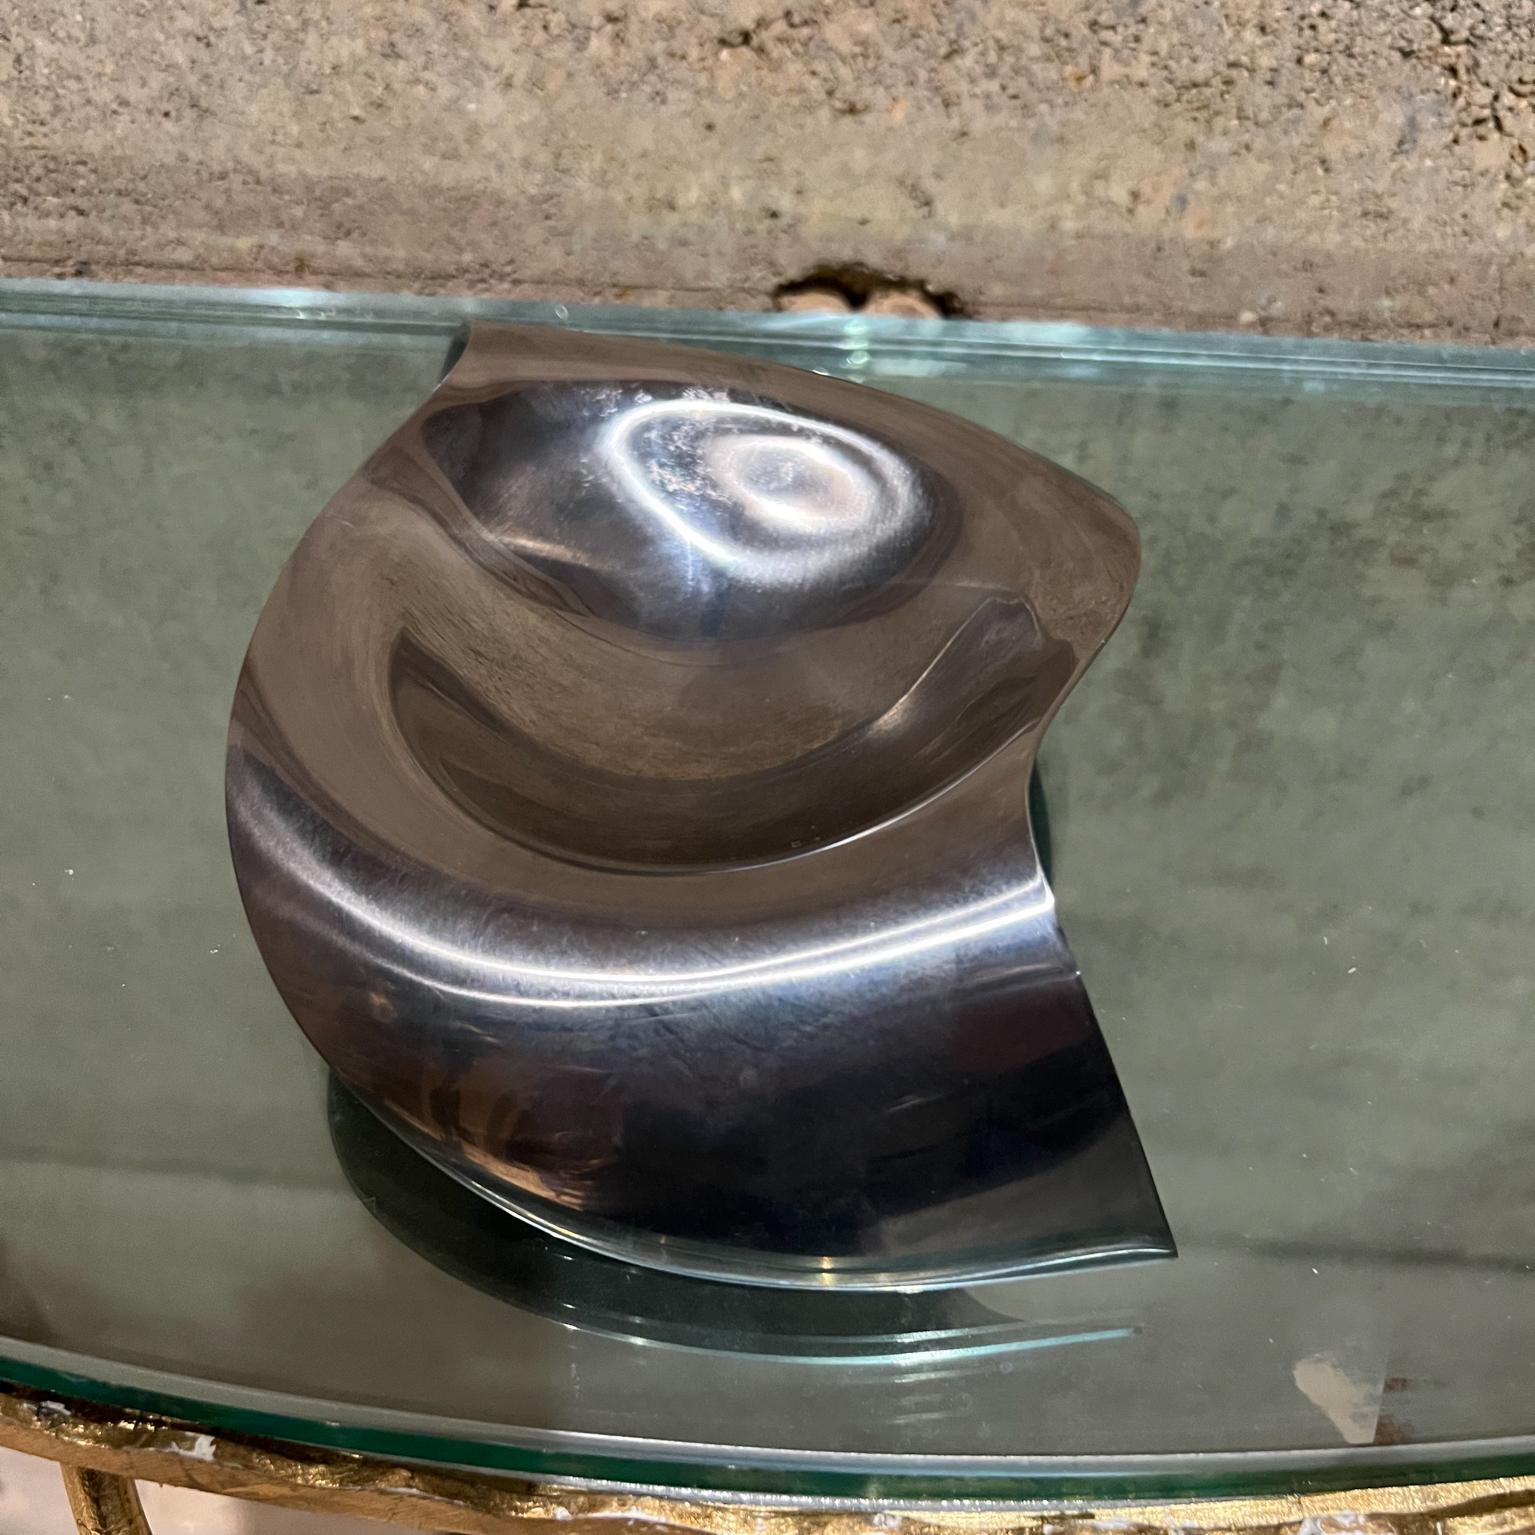 1993 Georg Jensen Denmark Sculptural Dish Stainless Steel Please Pass Me Bowl In Good Condition For Sale In Chula Vista, CA